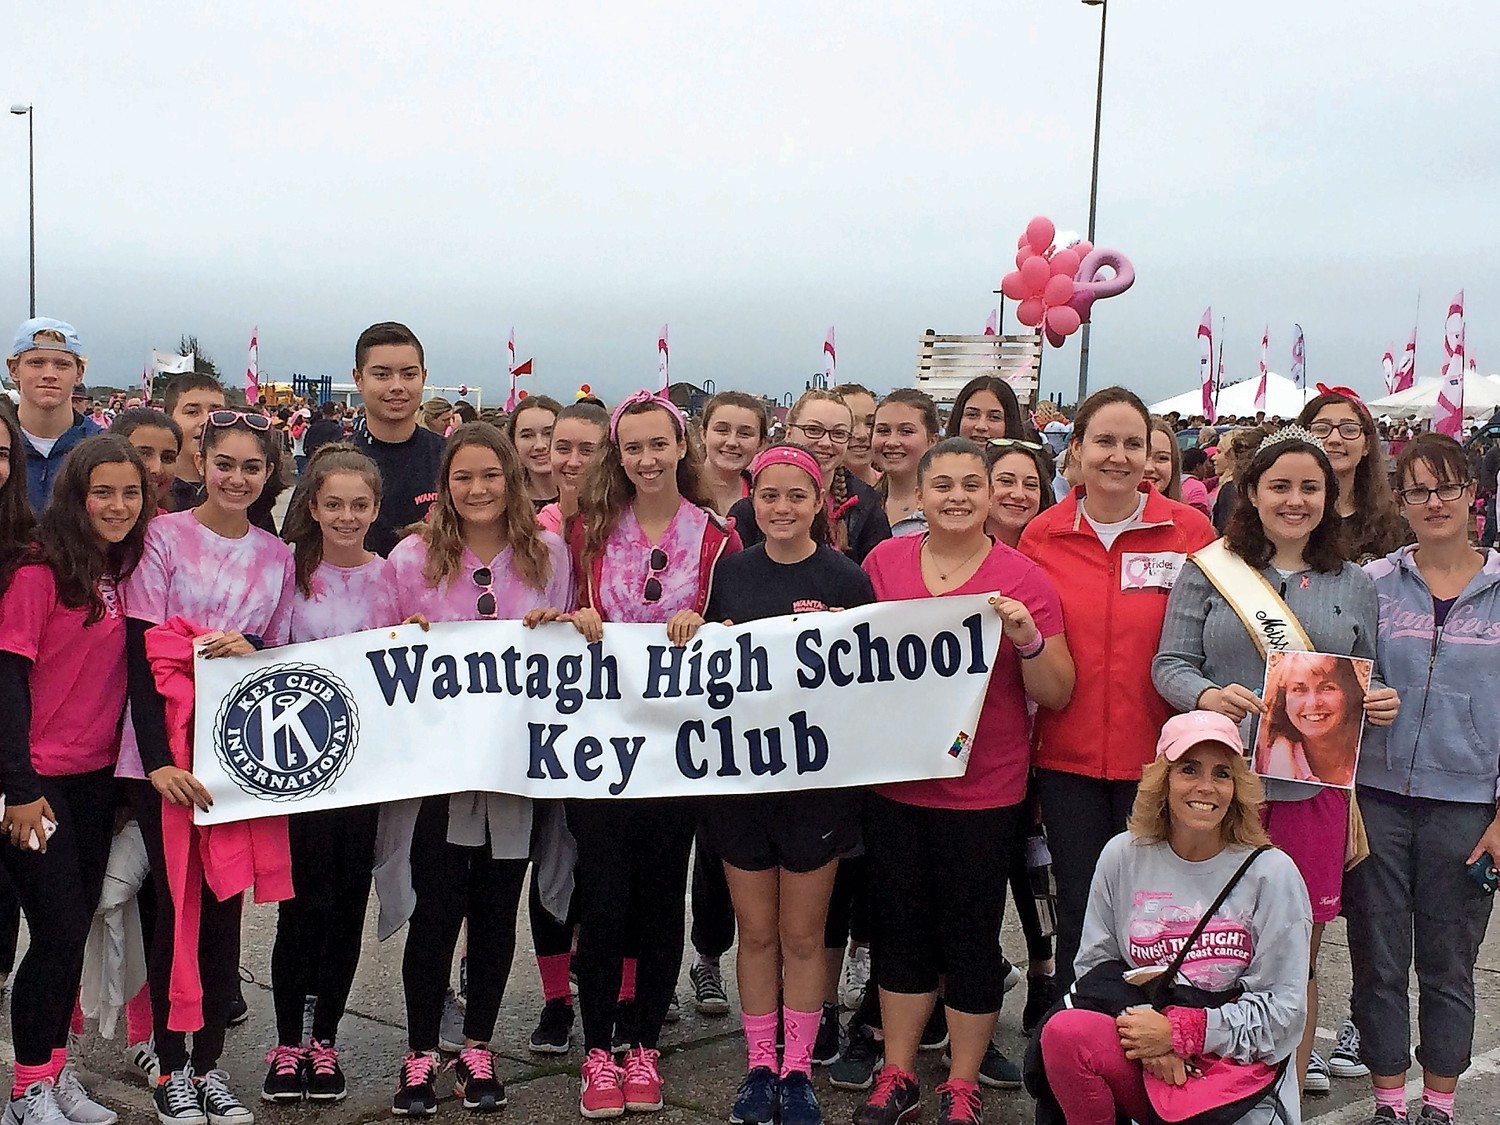 The Wantagh High School Key Club attended the Making Strides Against Breast Cancer 5K walk at Jones Beach State Park on Oct. 15.